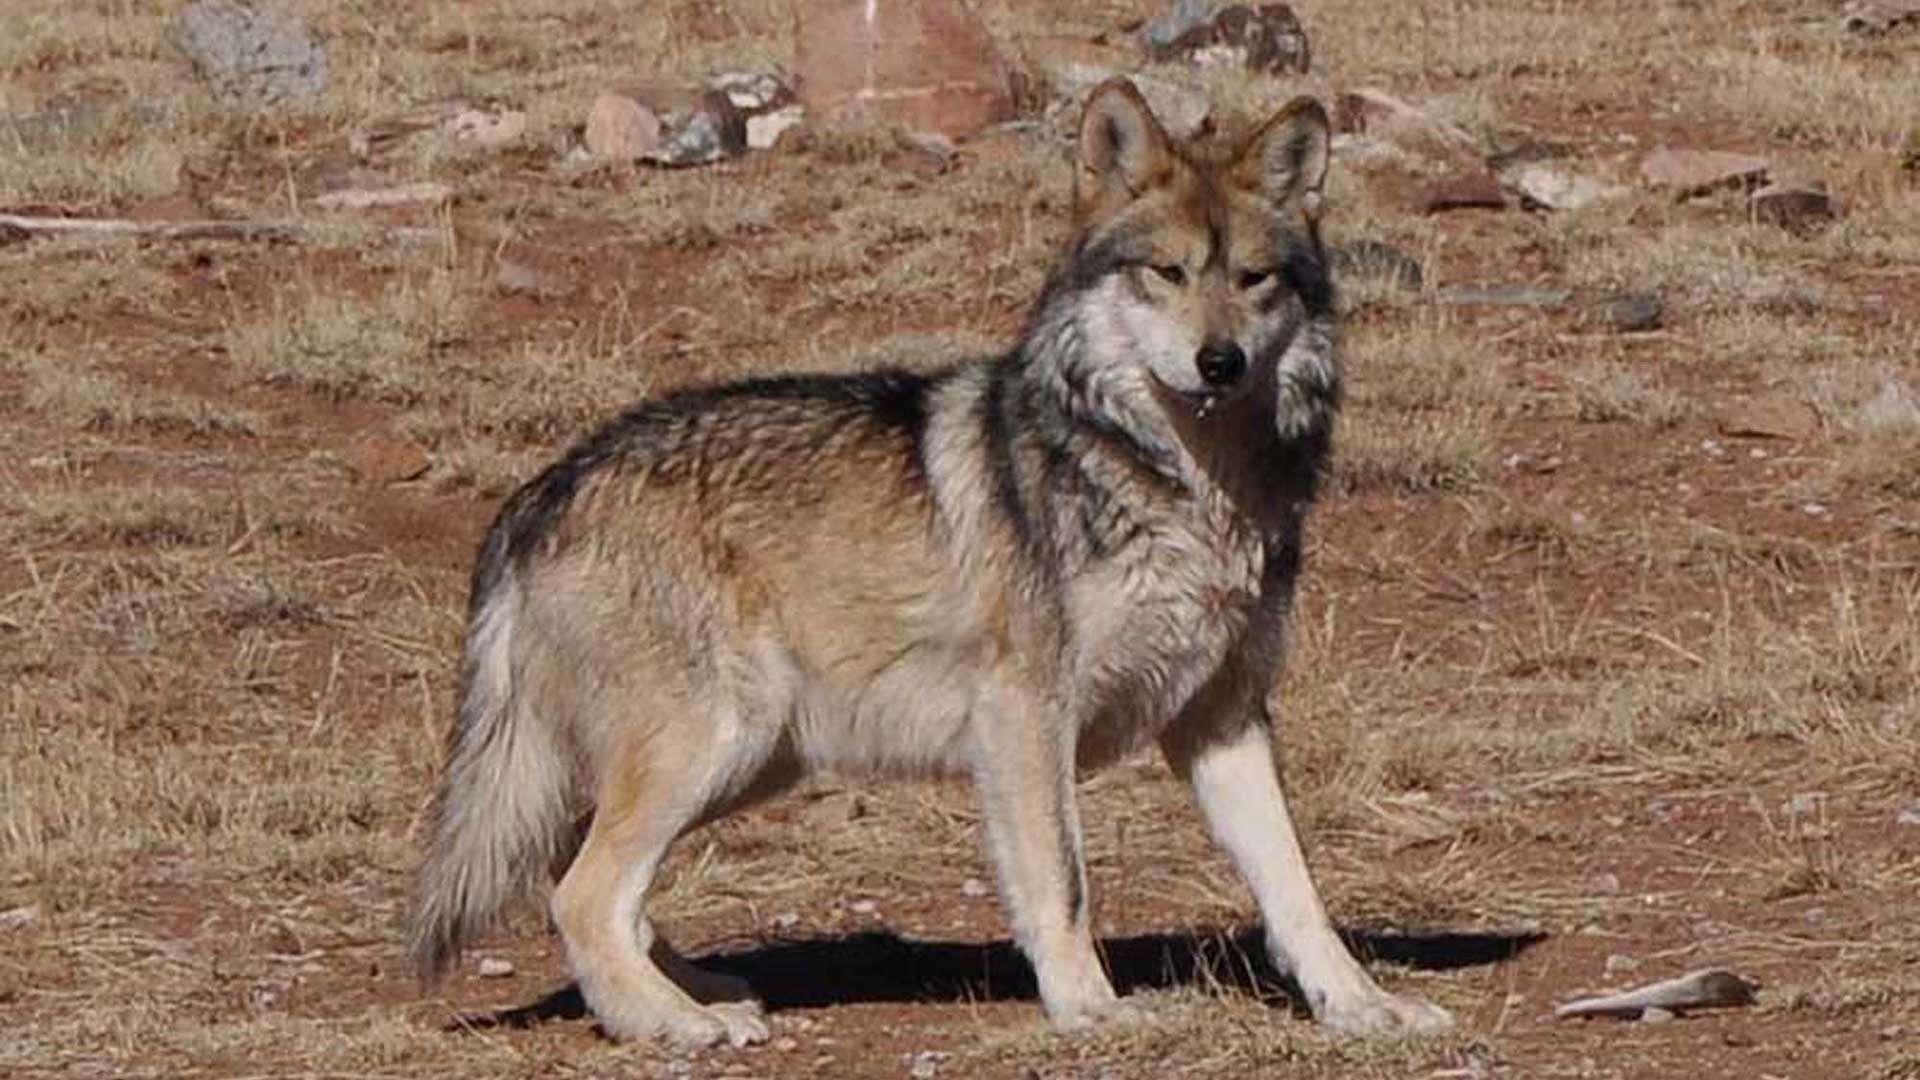 A Mexican gray wolf at the Sevilleta Wolf Management Facility in New Mexico in 2011.